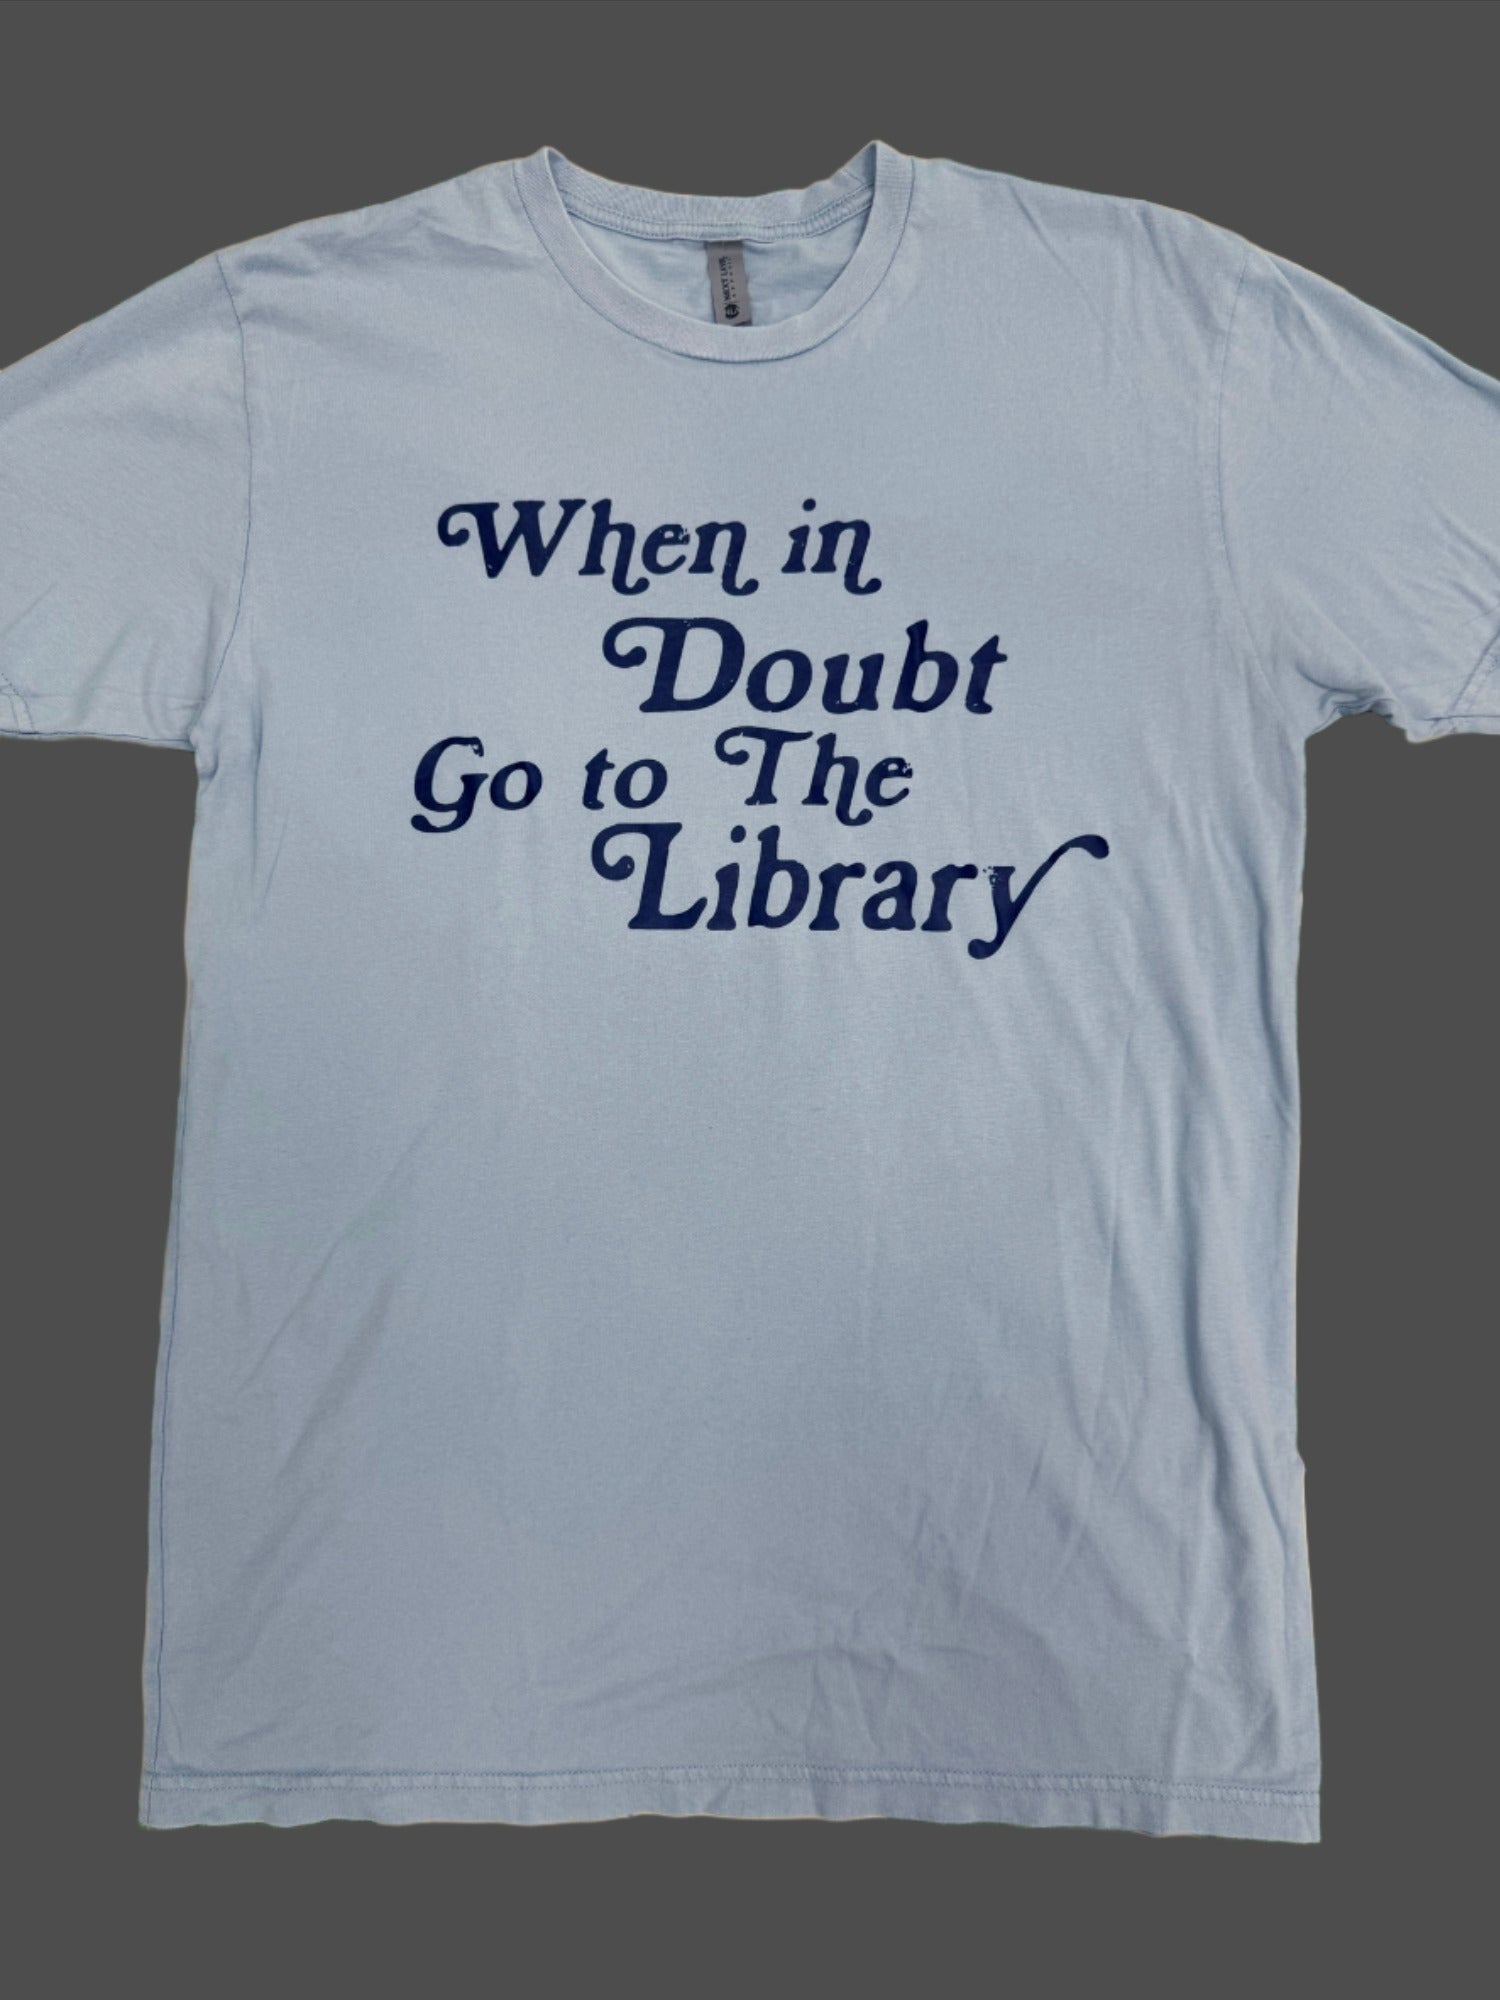 Sample Sale - When in Doubt Go to the Library Tee (M)